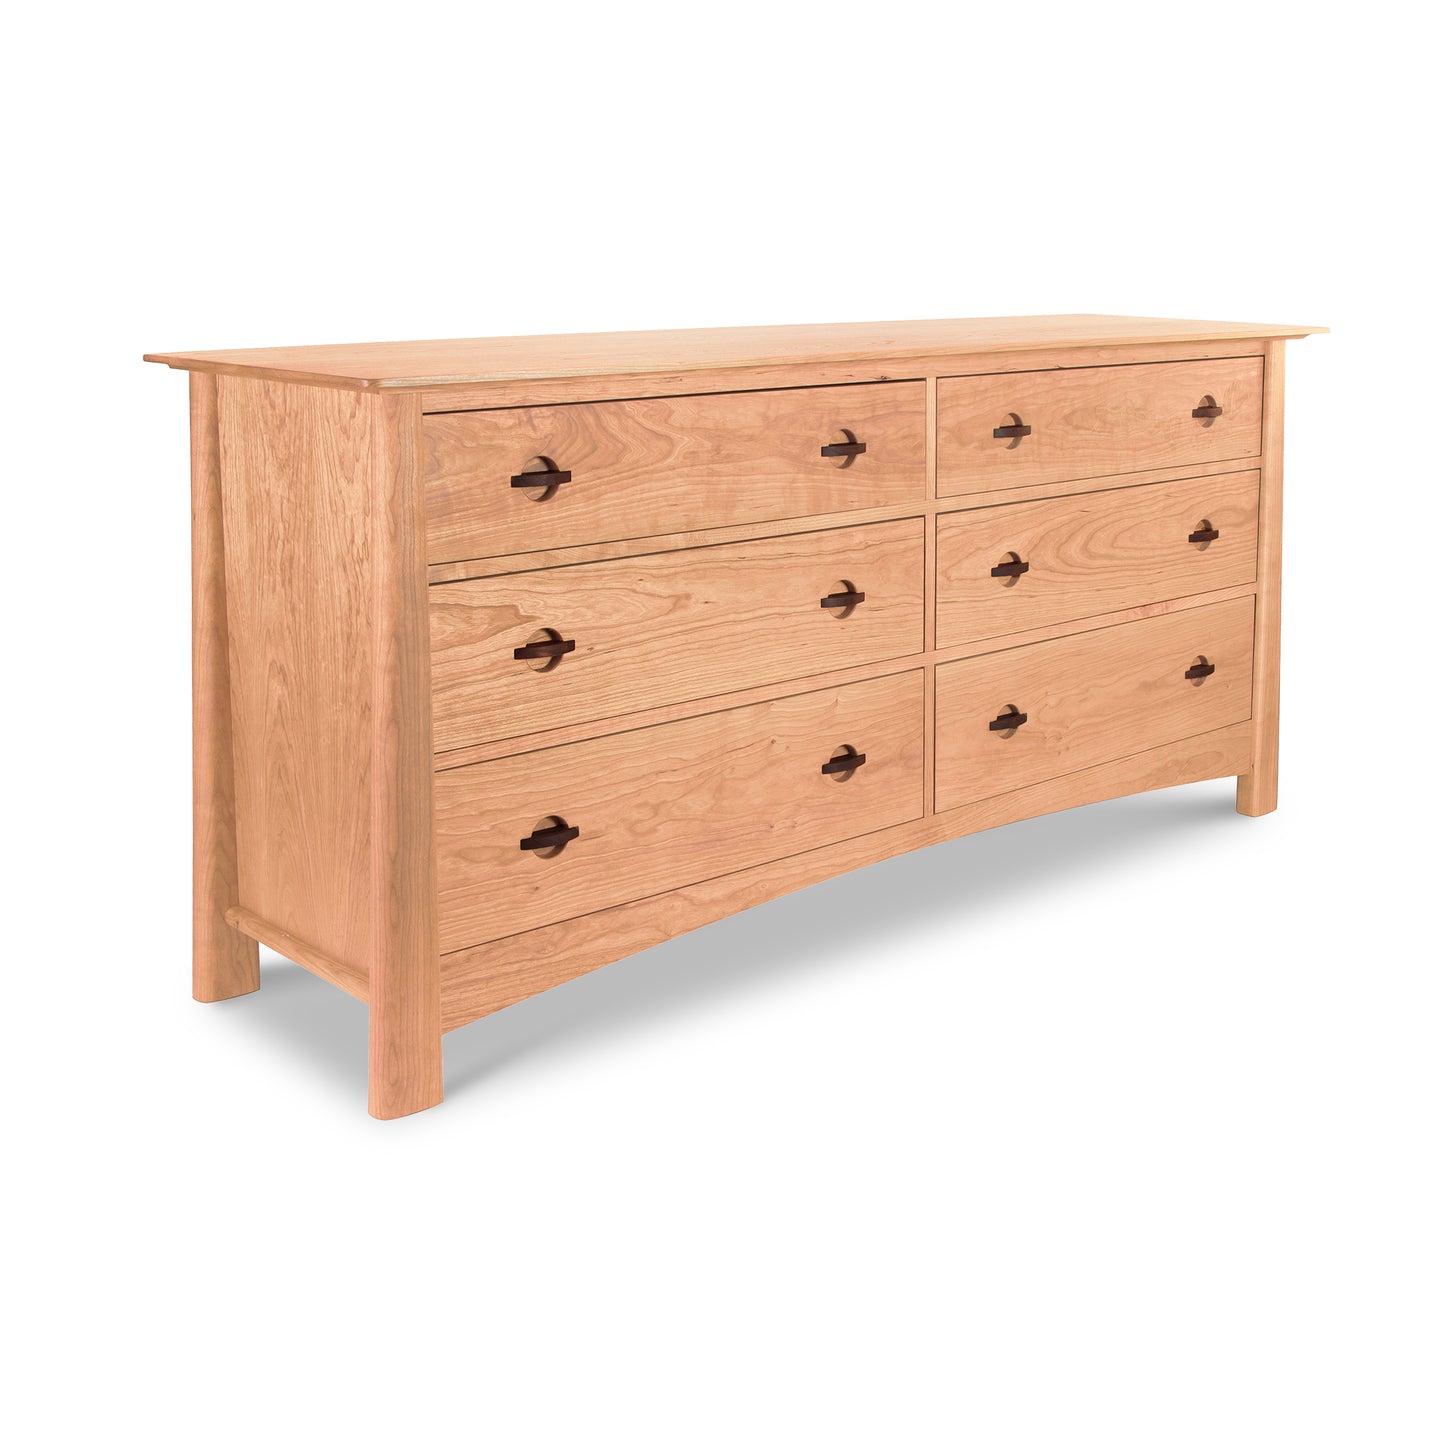 An eco-friendly Cherry Moon 6-Drawer Dresser by Maple Corner Woodworks with drawers on it.